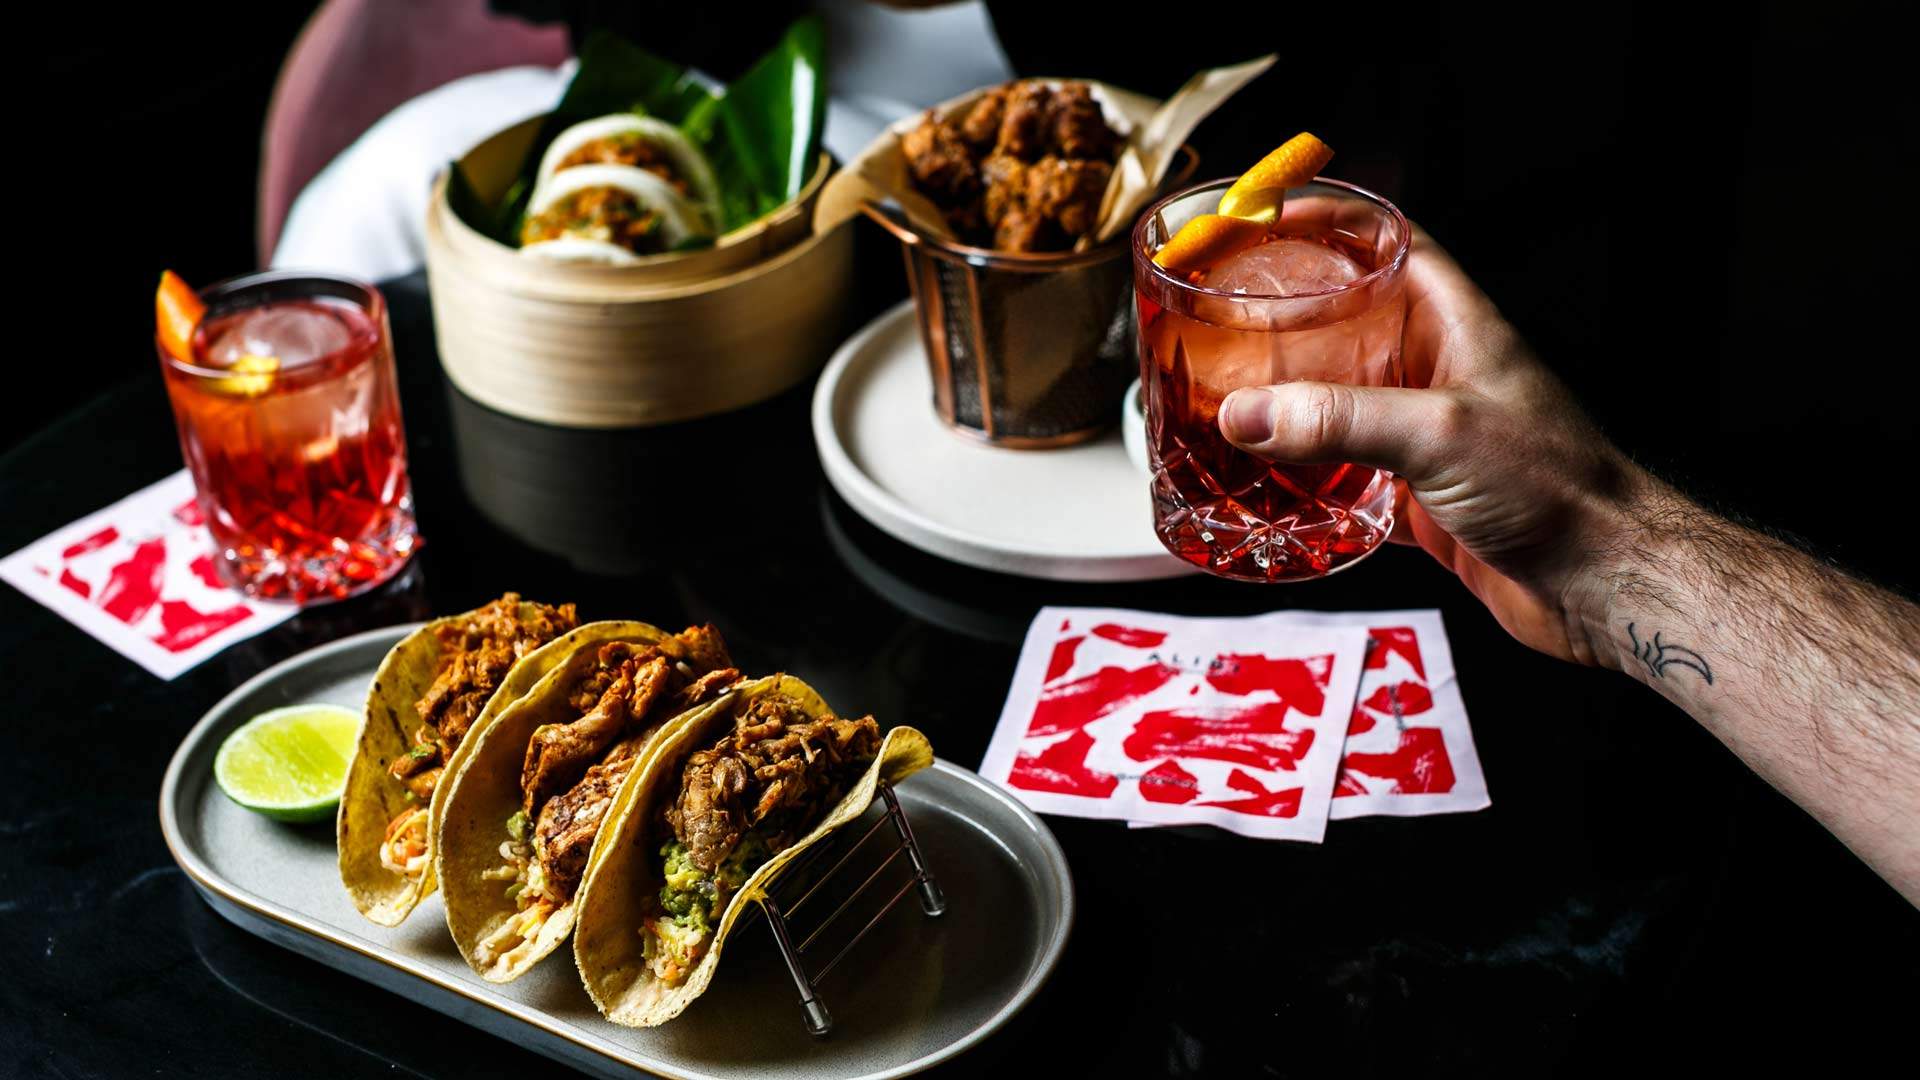 A selection of vegan tacos and cocktails in Sydney vegan restaurant — Alibi Bar and Kitchen